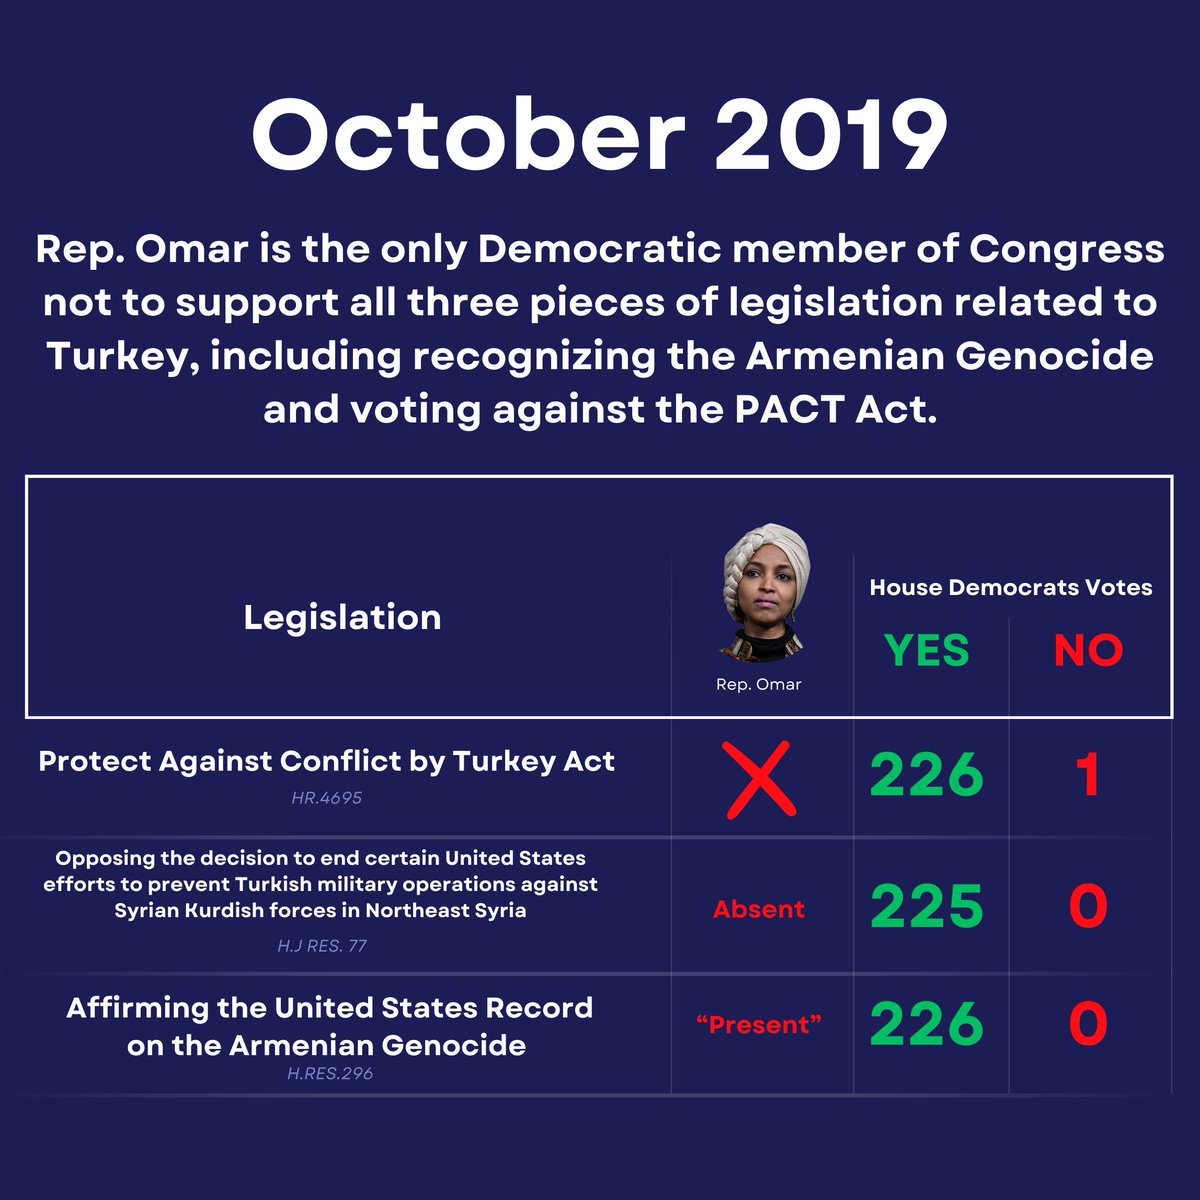 Lol at Ilhan Omar being the only member of the Democratic caucus to recognise the Armenian Genocide. Turns out she took some funding from a guy related to Erdogan